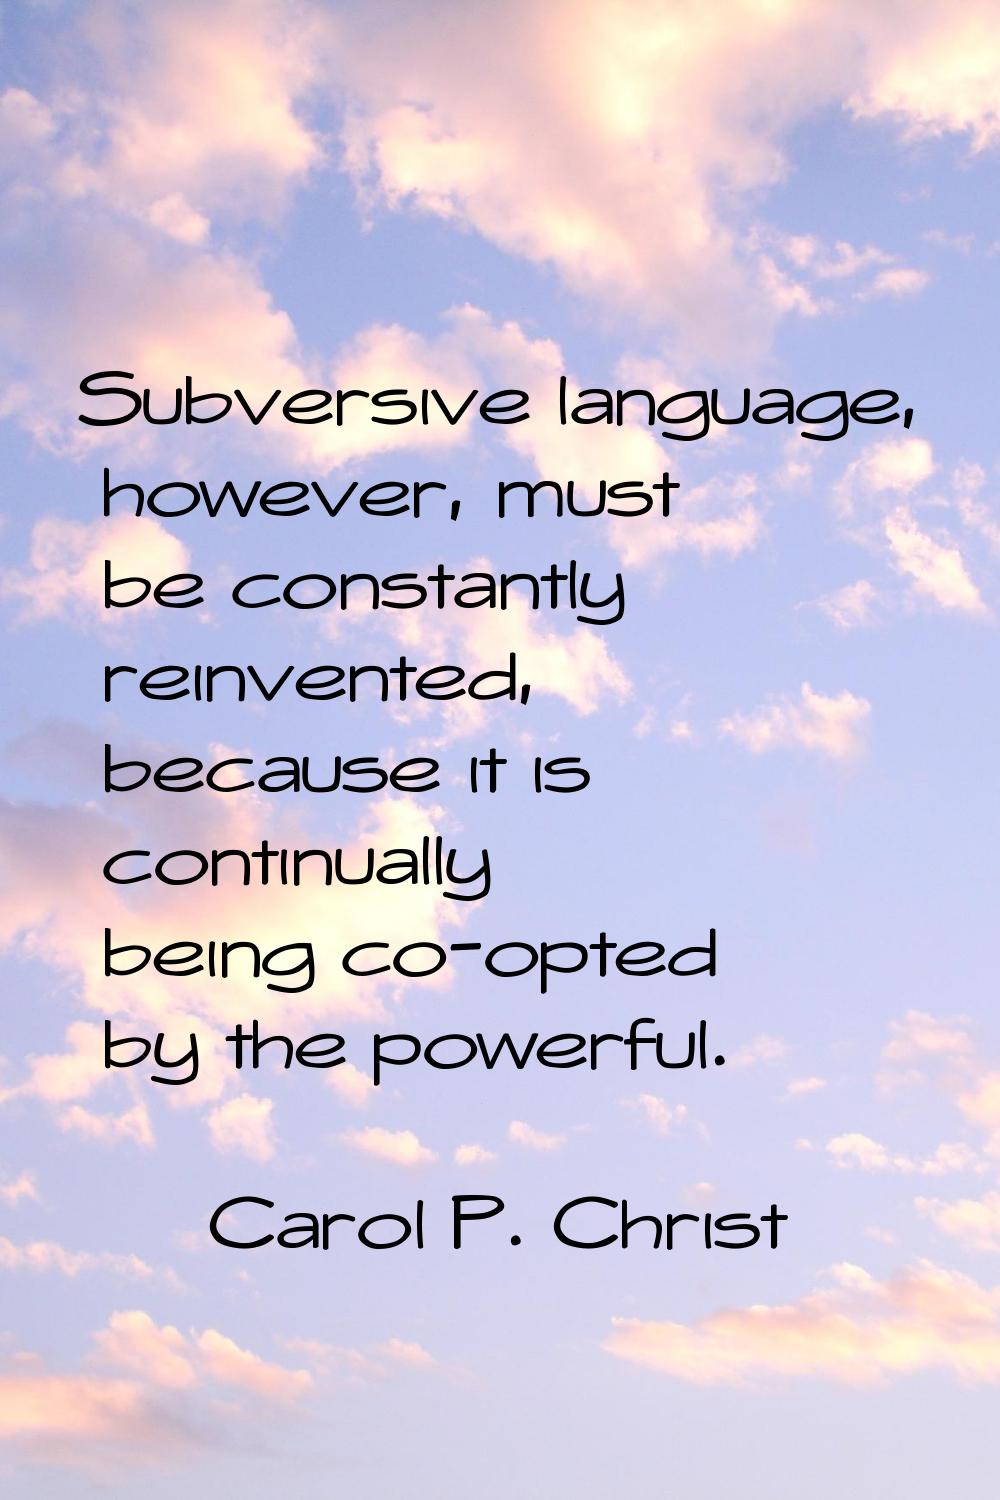 Subversive language, however, must be constantly reinvented, because it is continually being co-opt